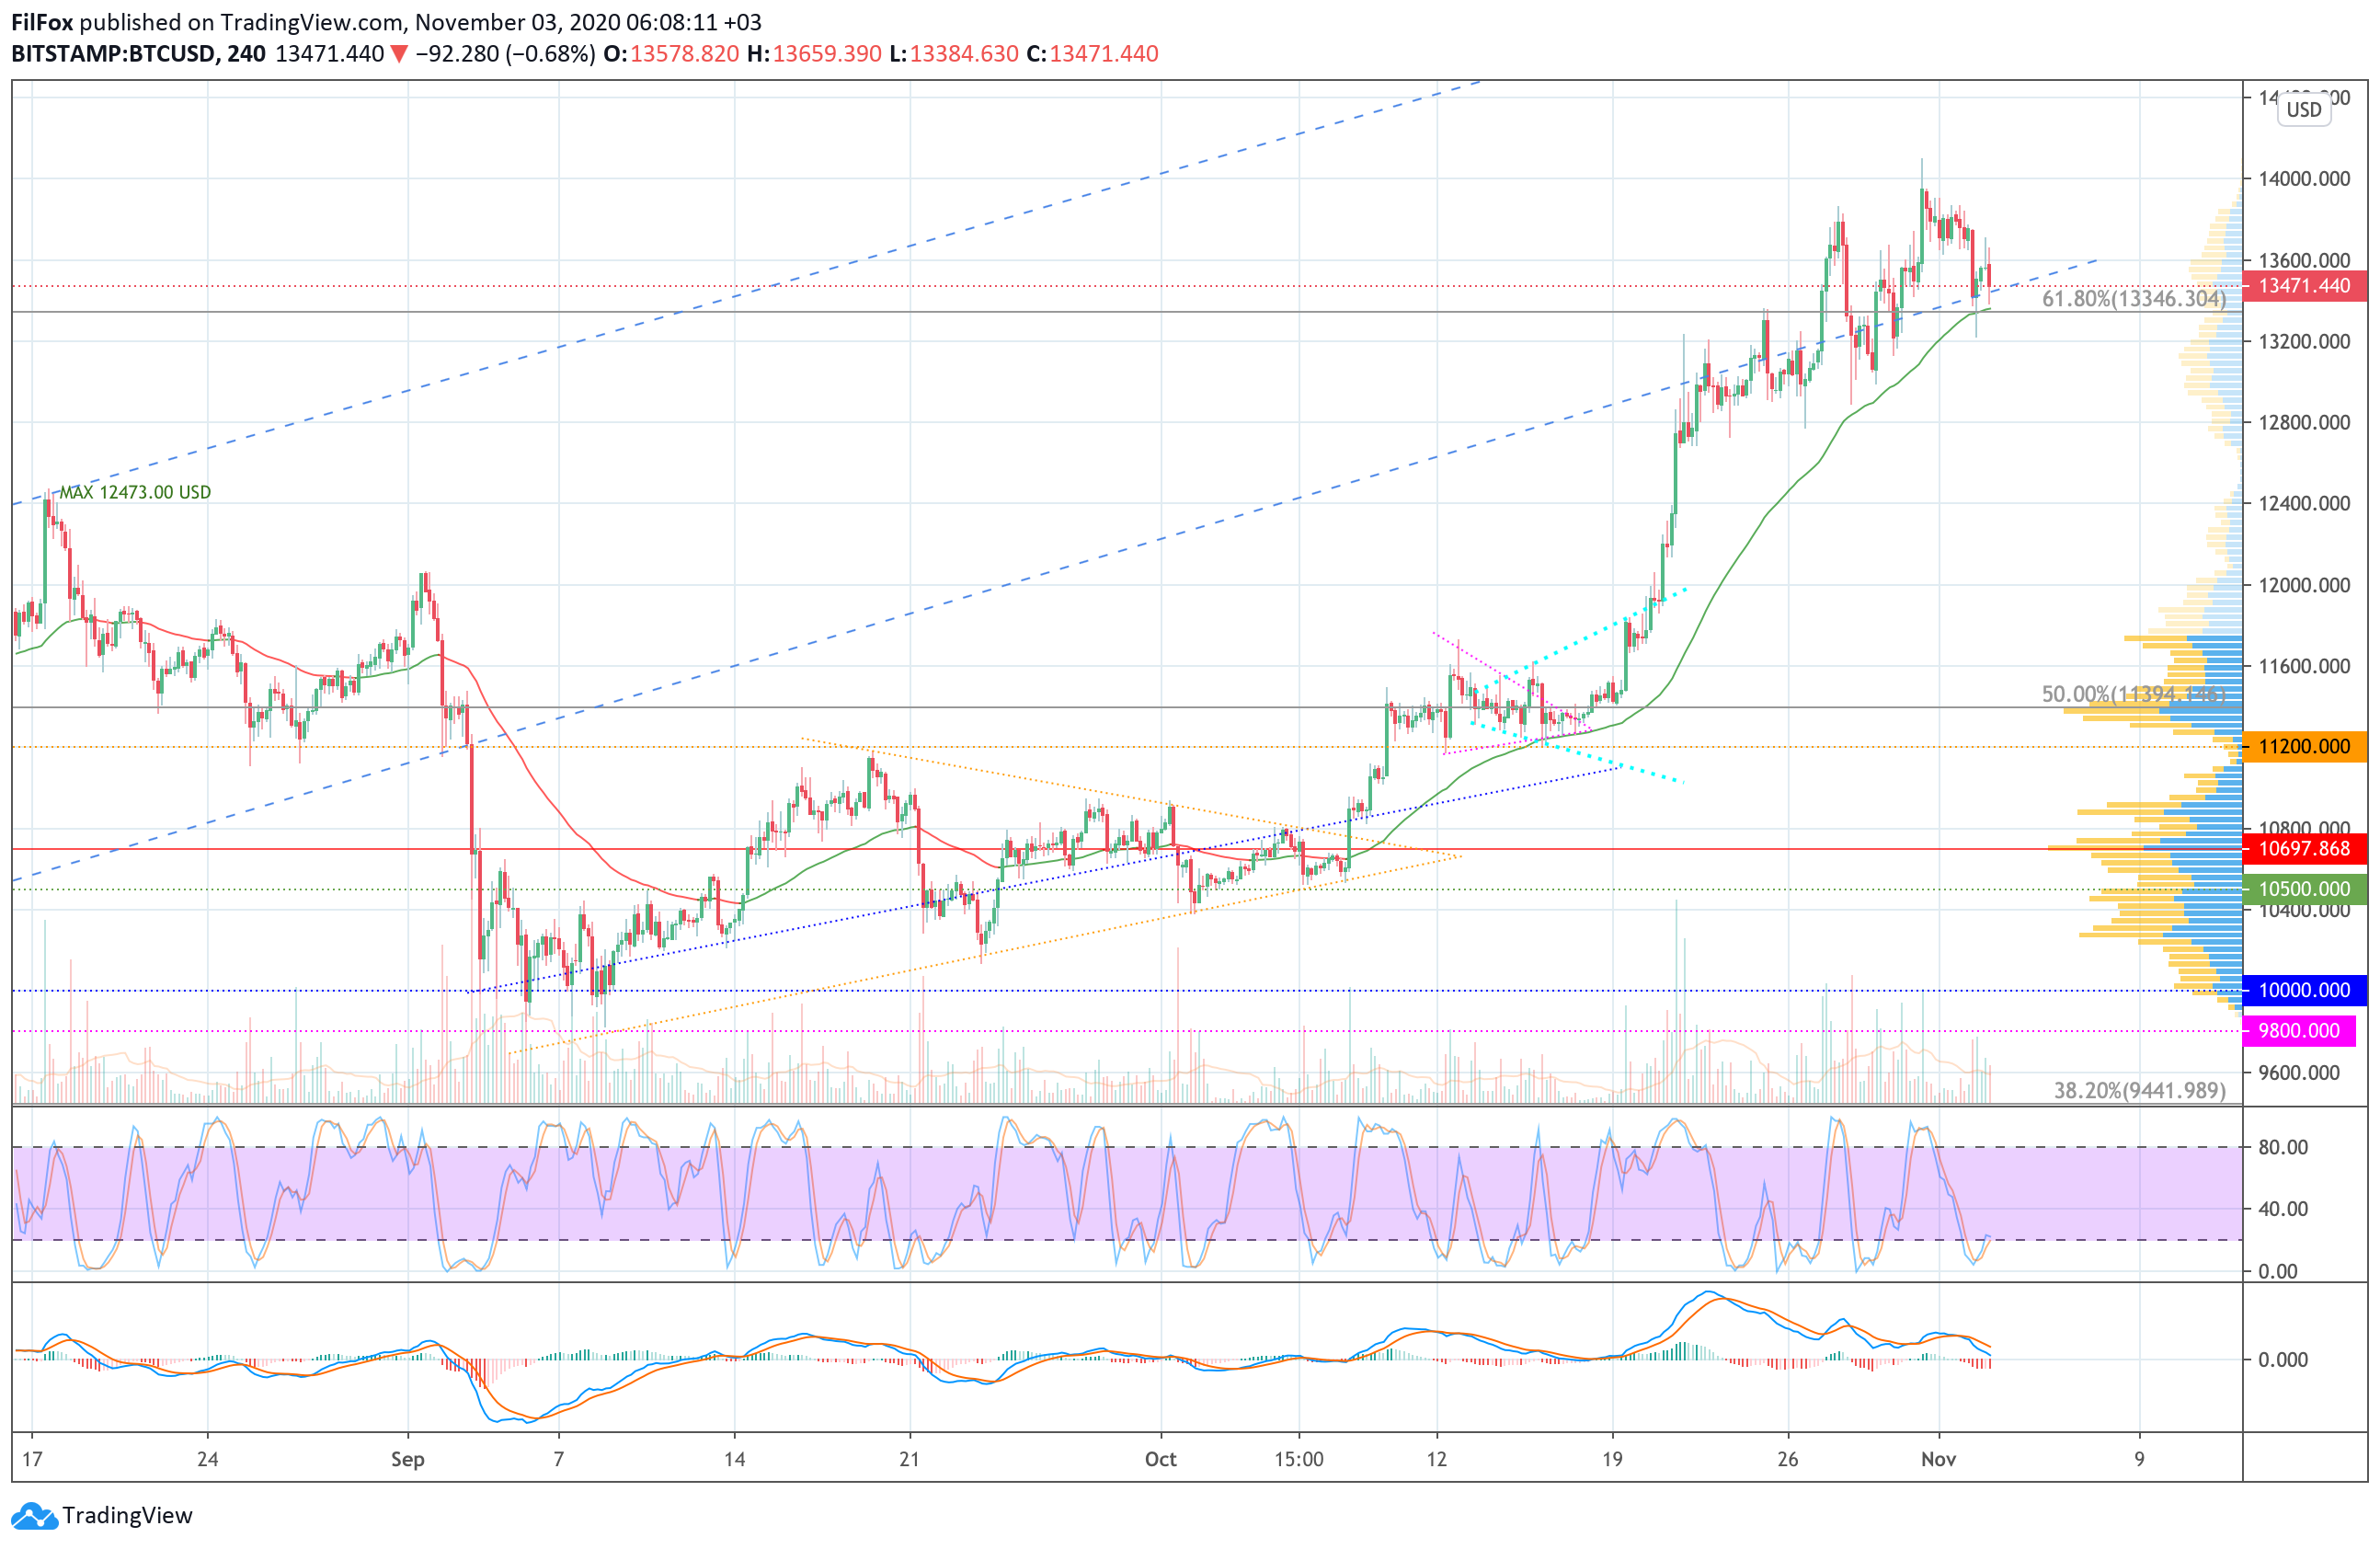 Analysis of prices for Bitcoin, Ethereum, Ripple for 11/03/2020